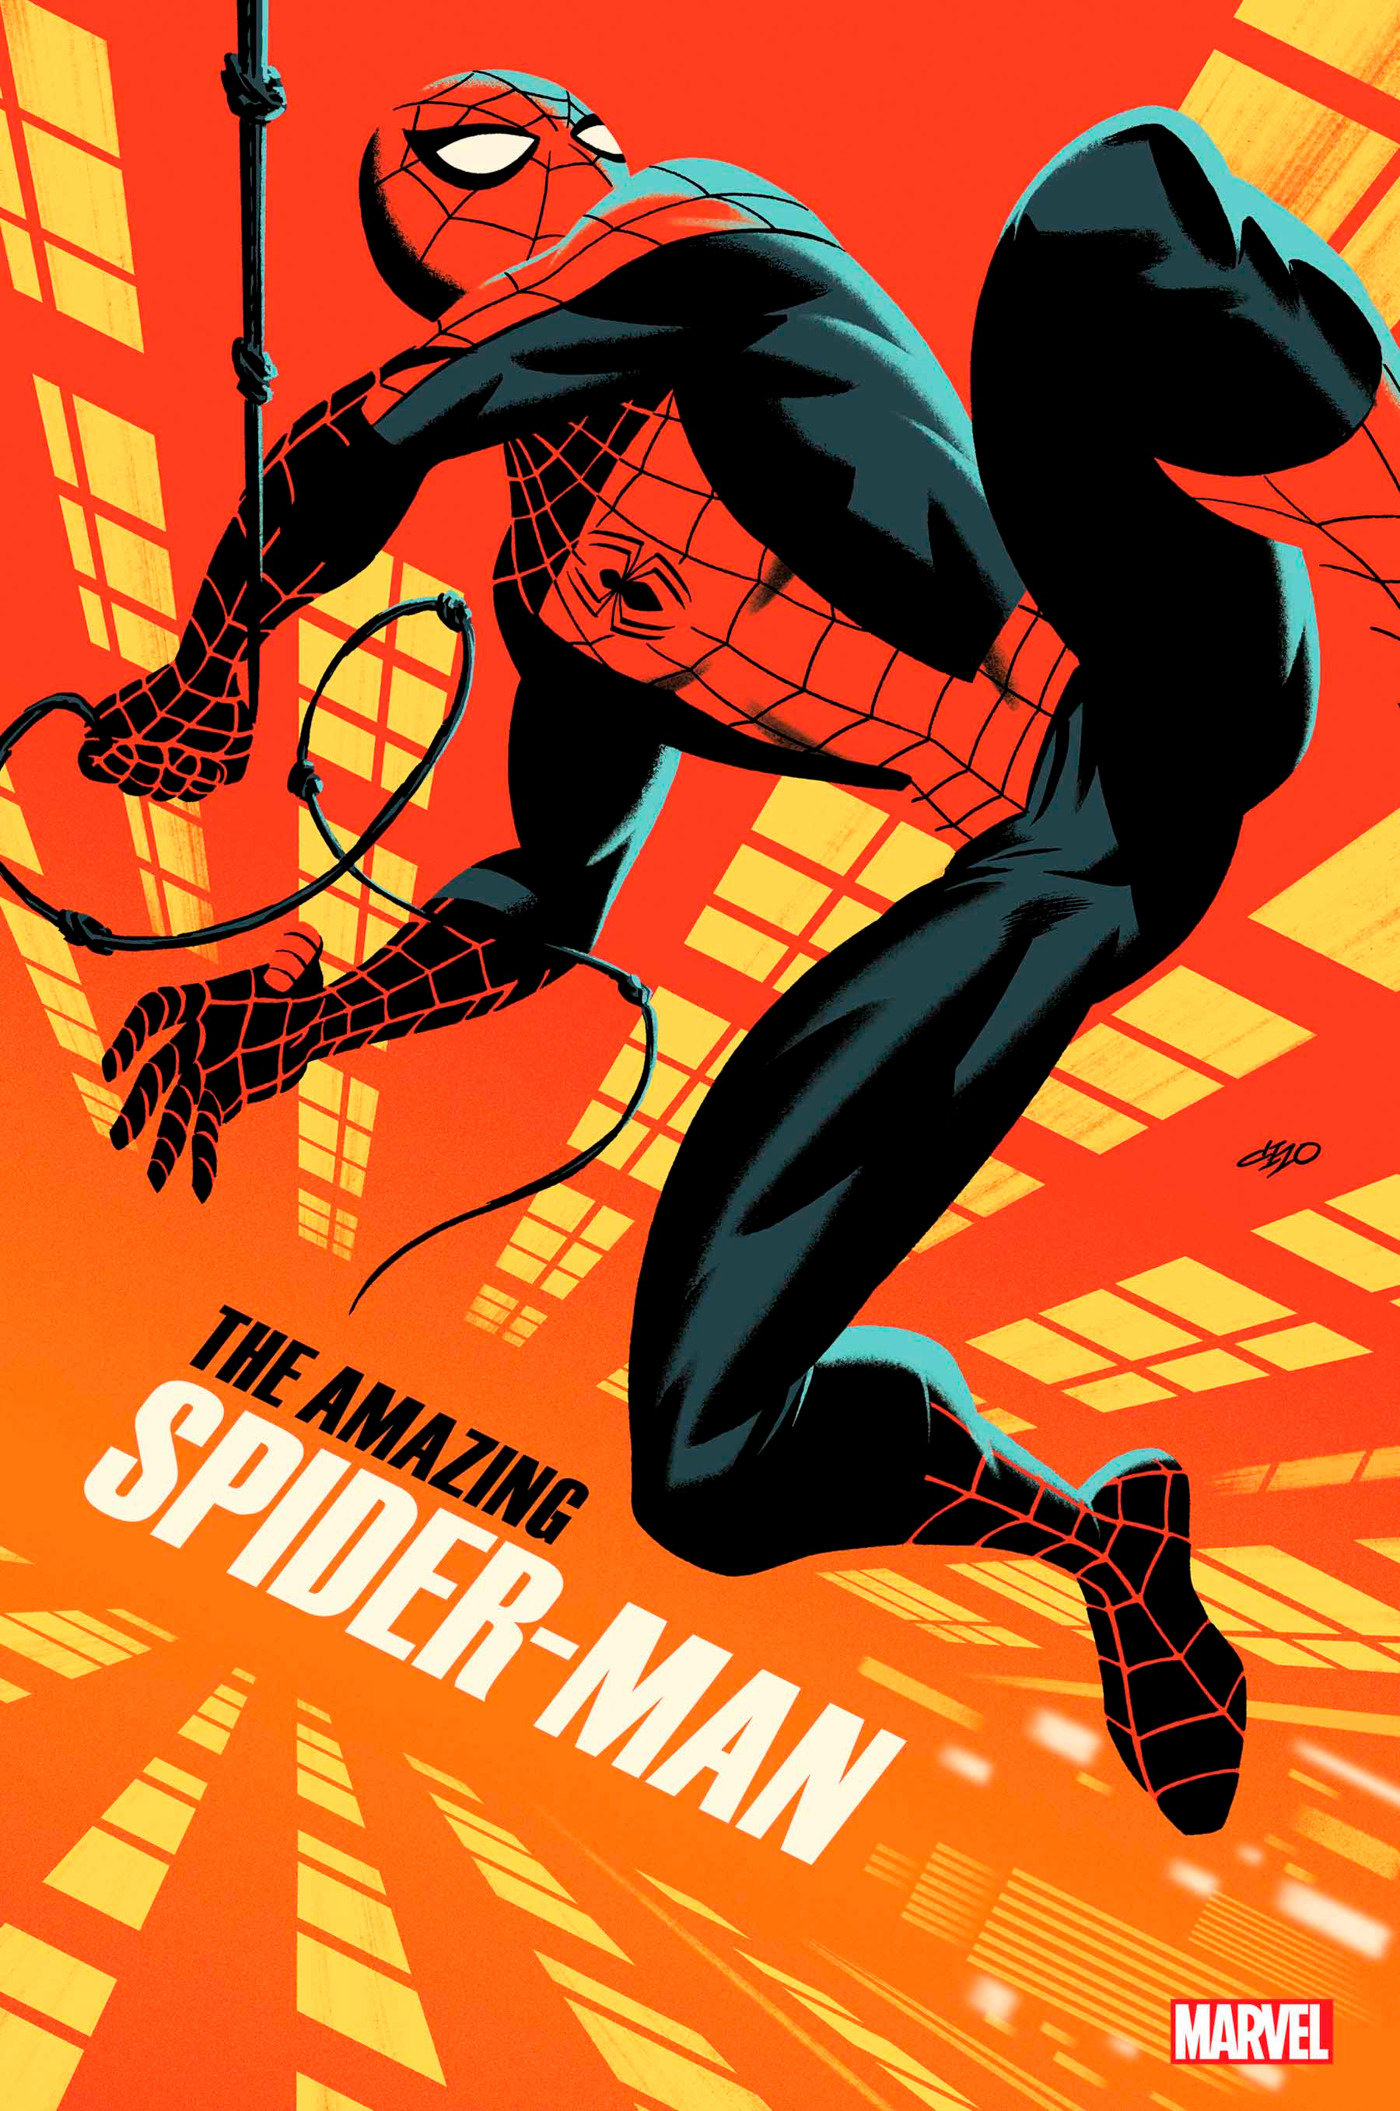 Amazing Spider-Man #46 Michael Cho Variant 1 for 25 Incentive